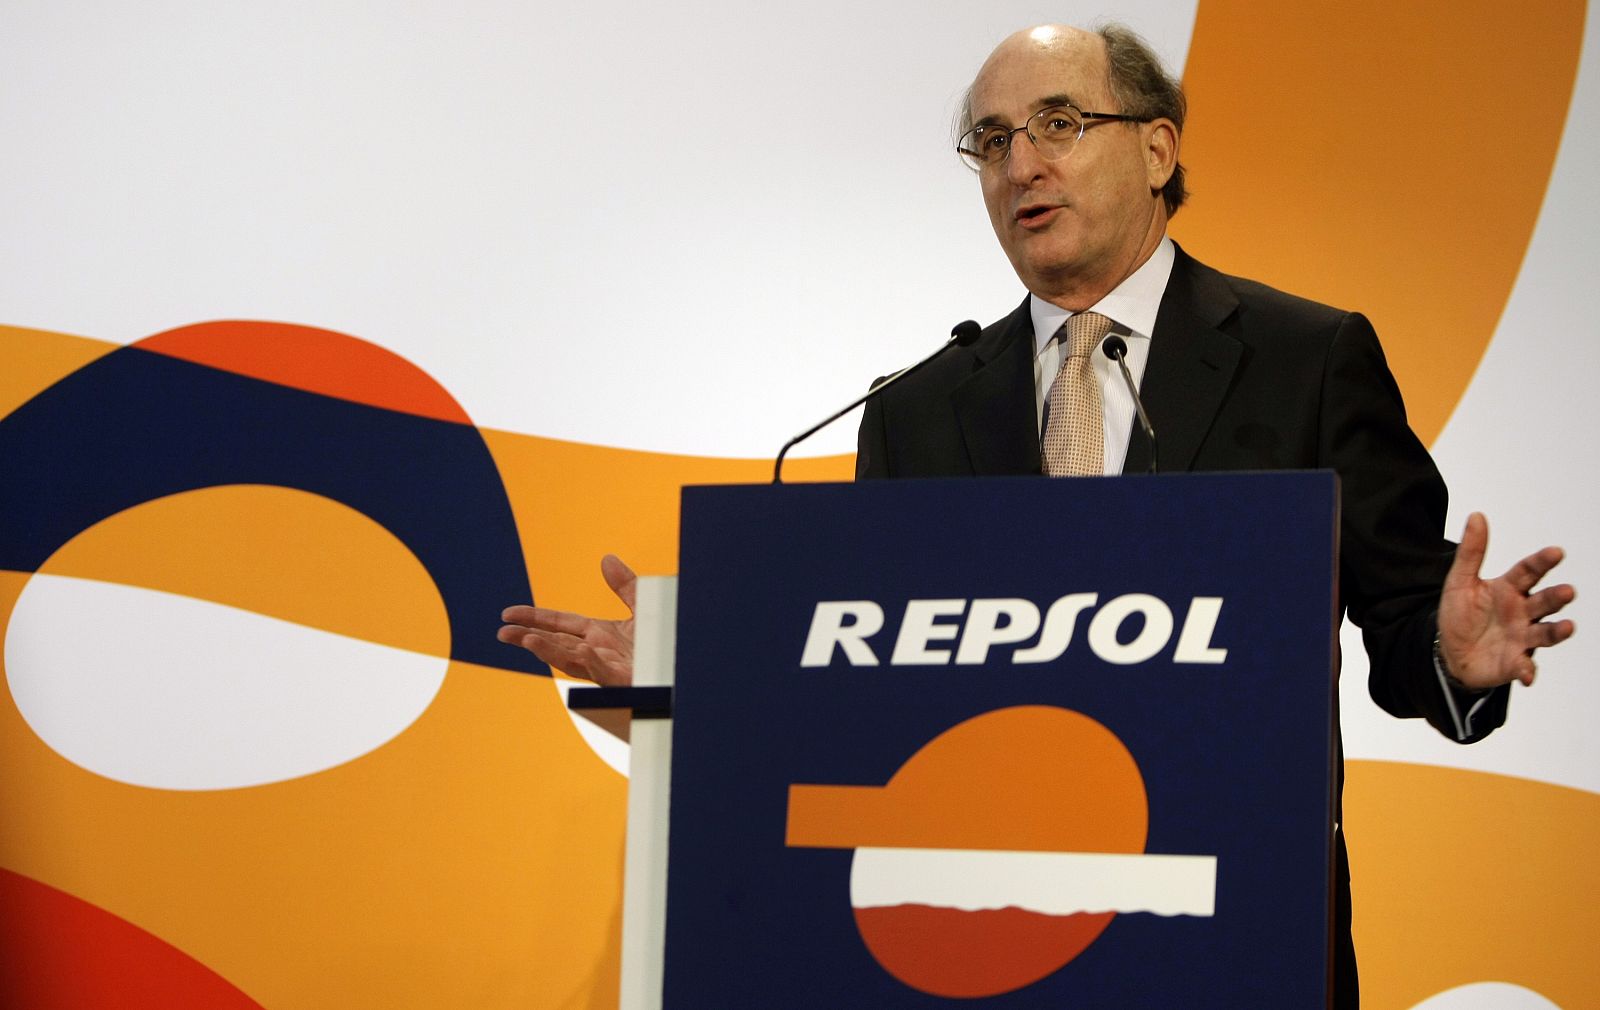 Antonio Brufau, chairman of Spanish energy company Repsol YPF, gestures during a ceremony to launch its annual "Guia Repsol" tourist guide in Madrid